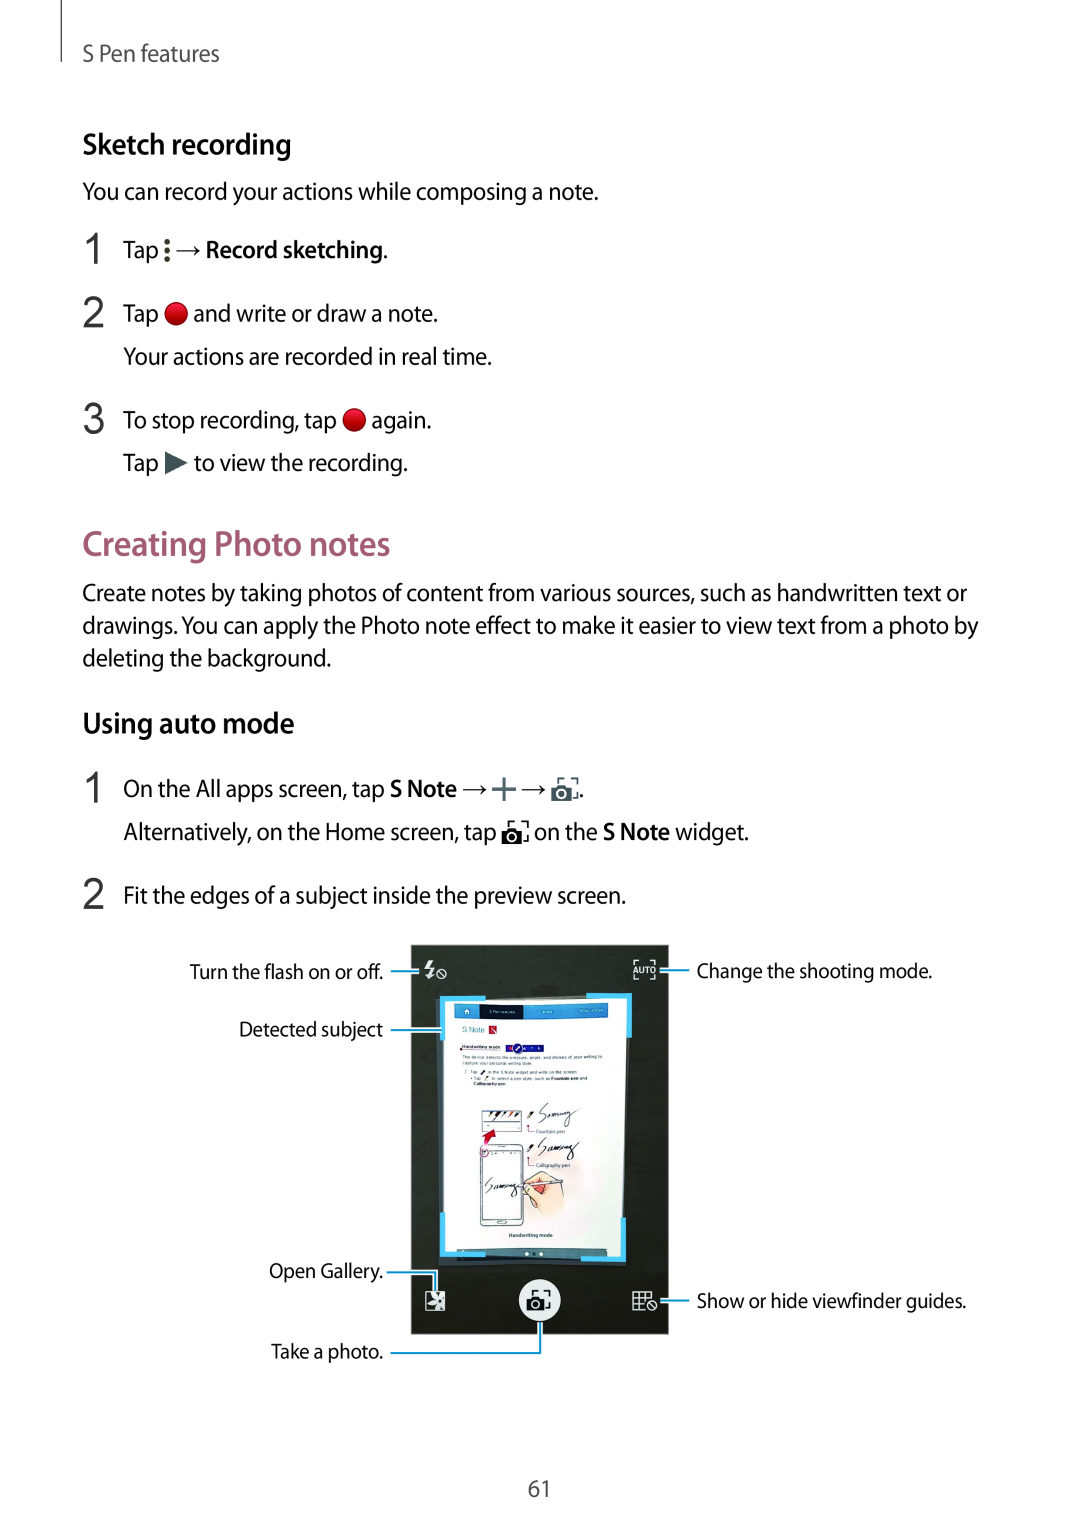 Samsung SM-N915FZKESER Creating Photo notes, Sketch recording, Using auto mode, Tap →Record sketching, S Pen features 